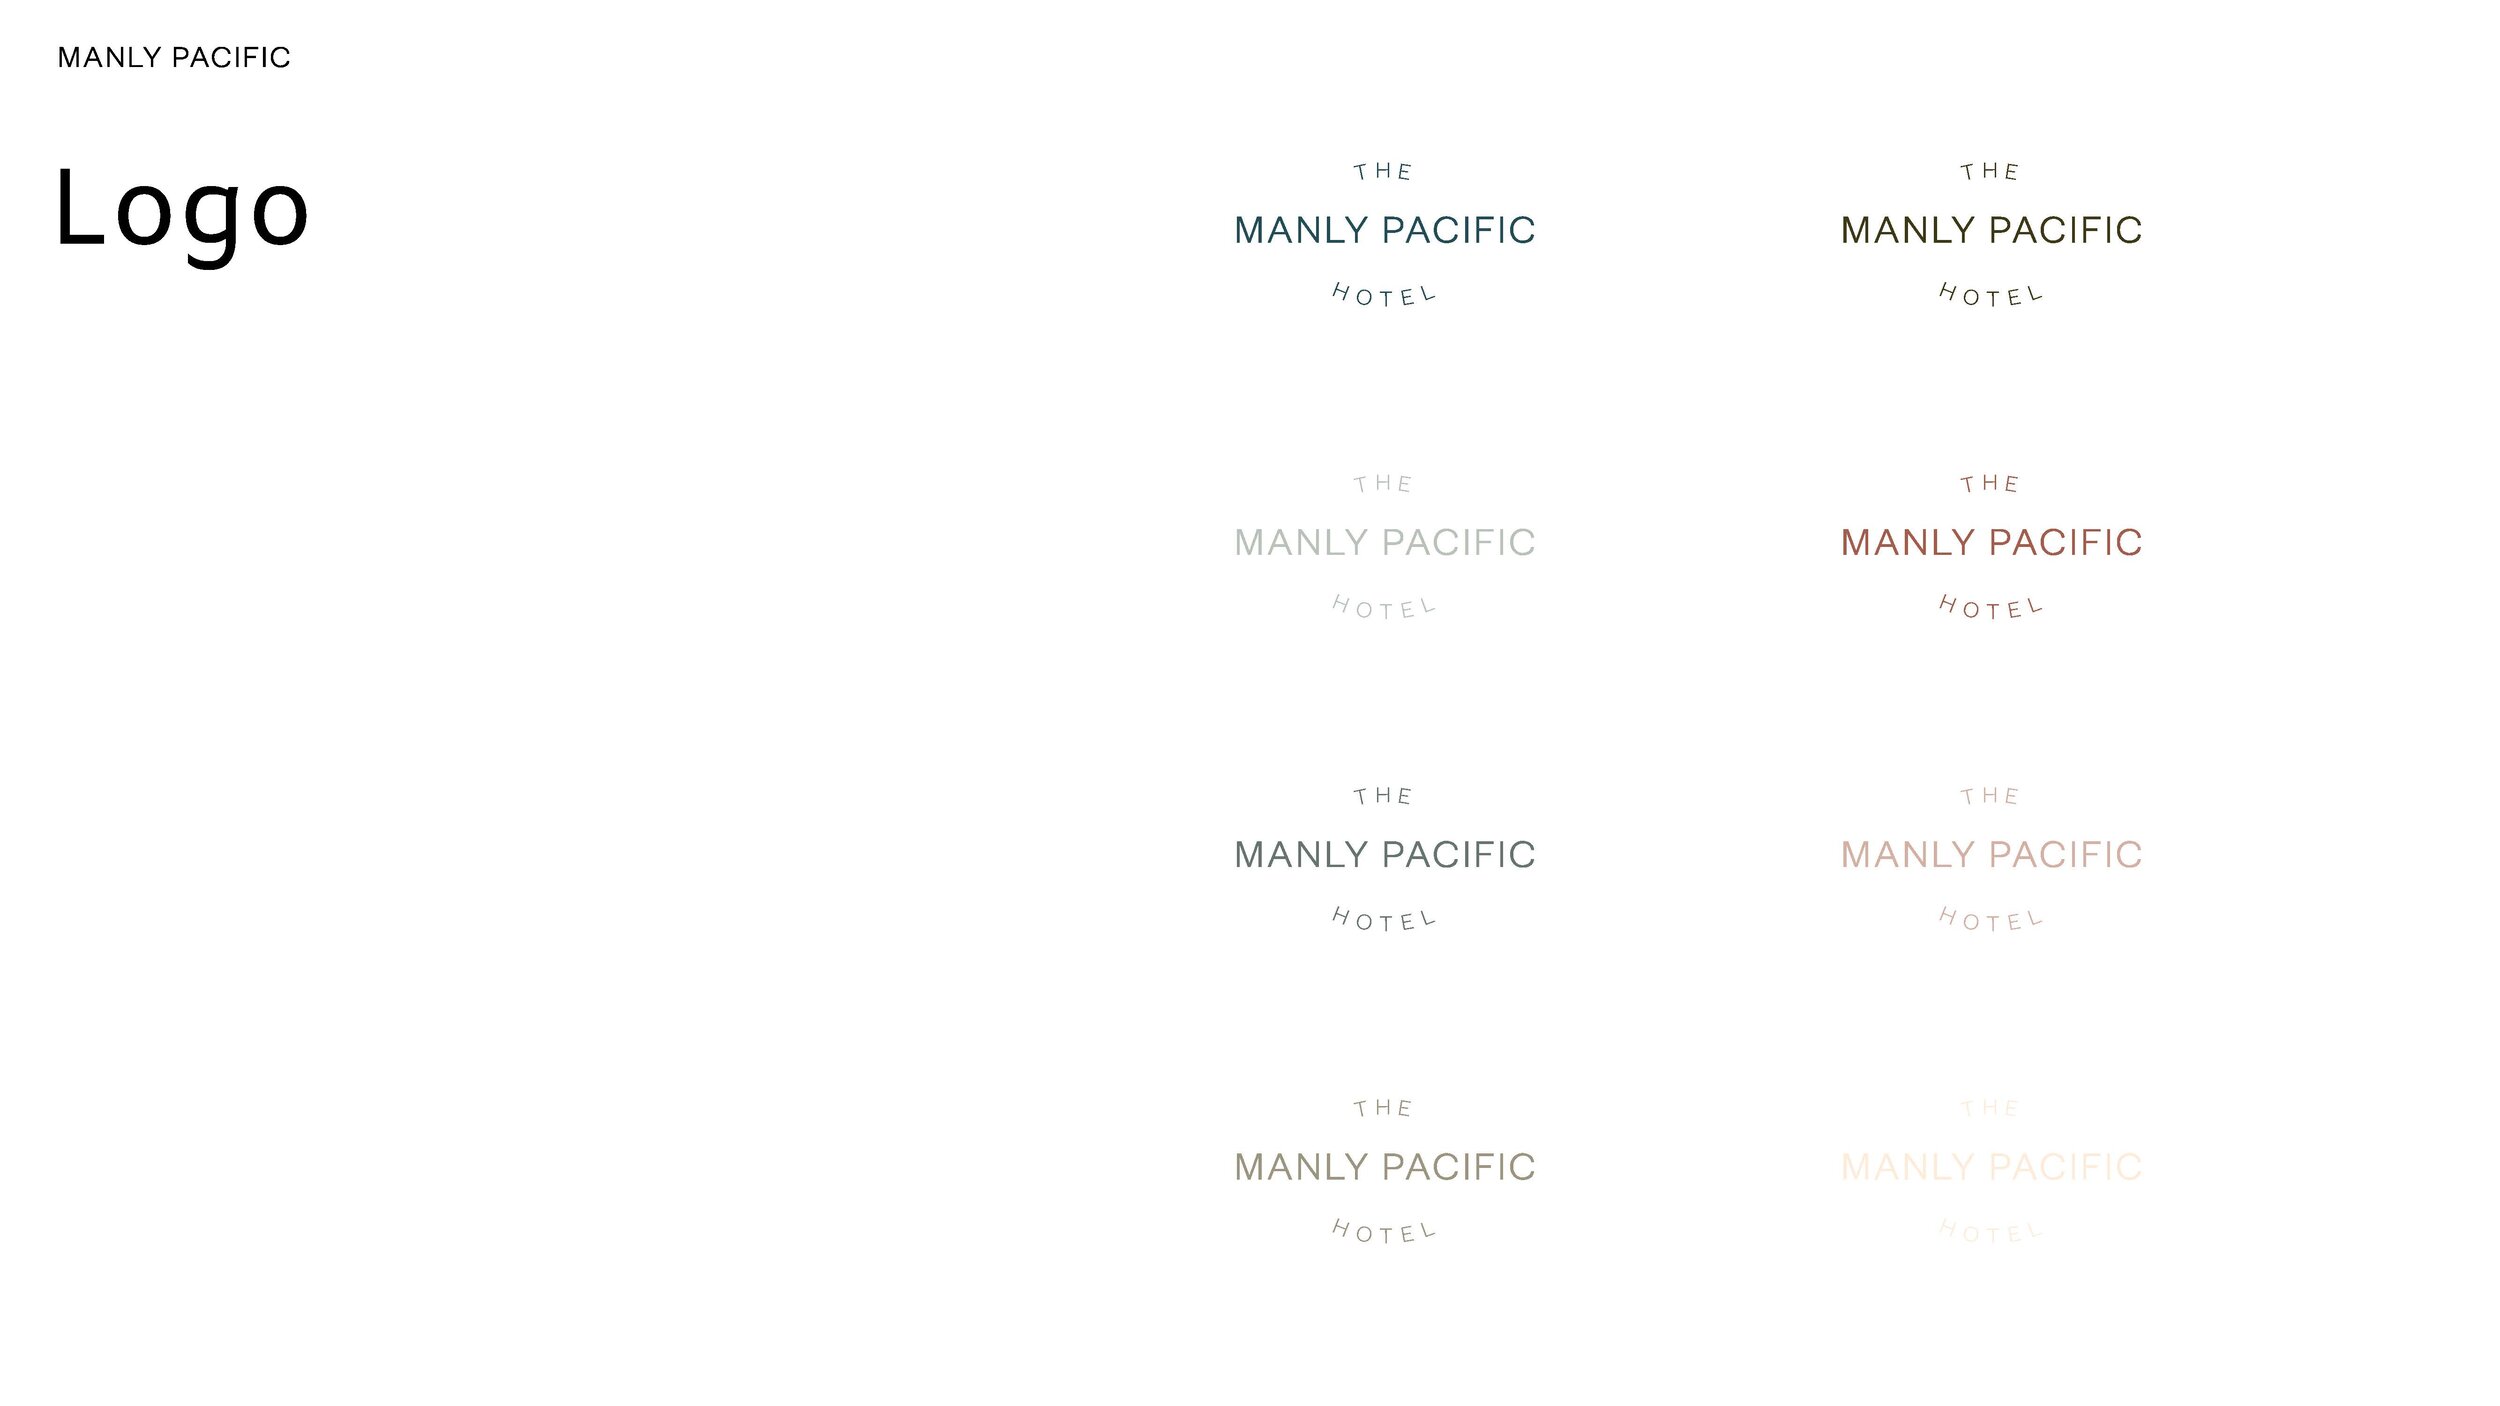 02_Manly_Pacific_Blueprint_Page_06.jpg